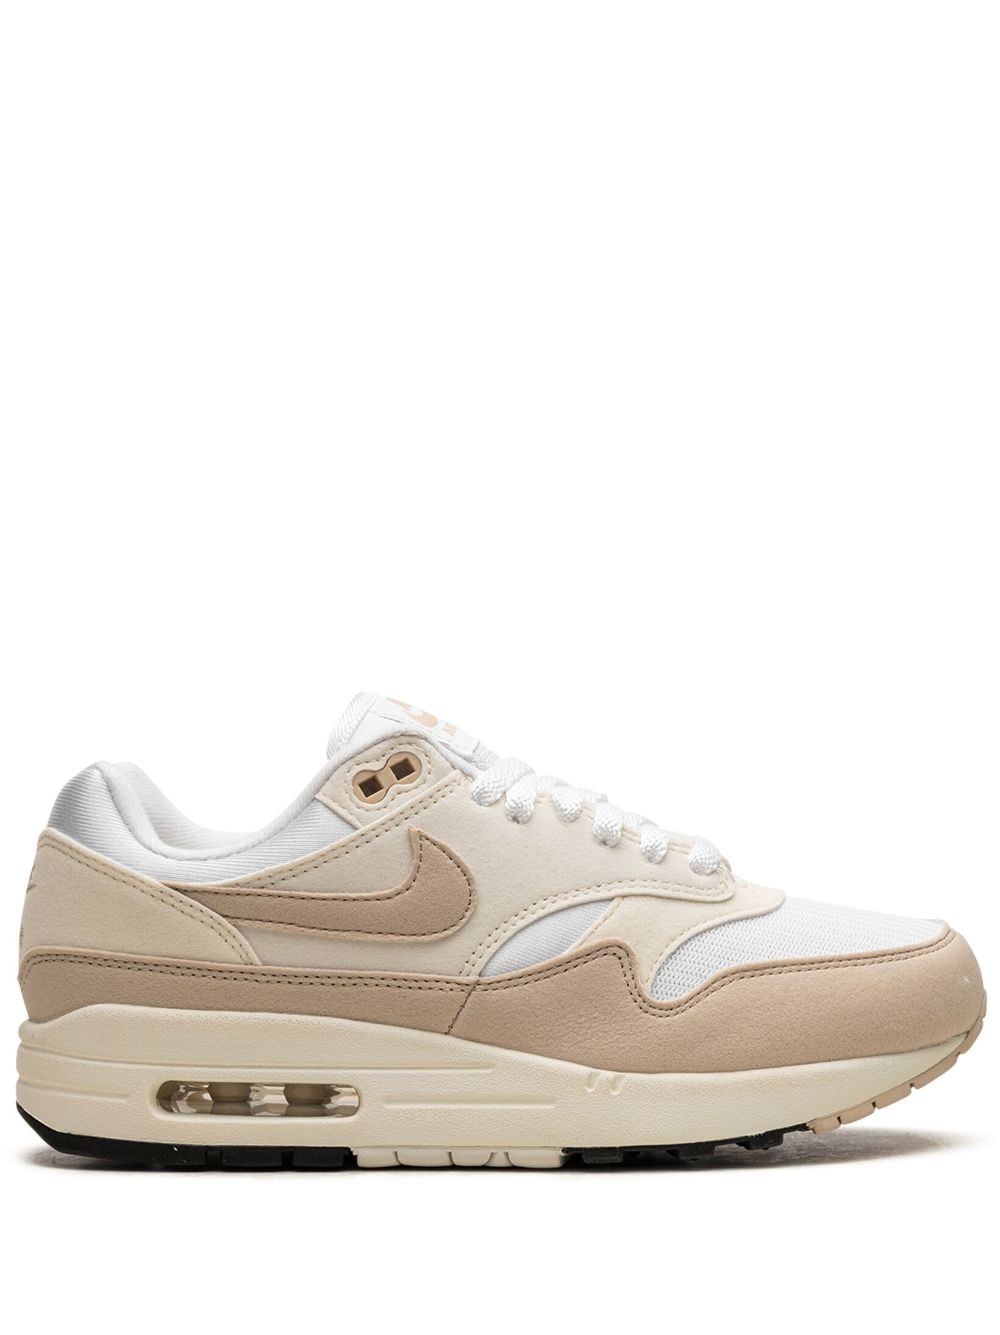 Image 1 of Nike Air Max 1 "Pale Ivory" sneakers